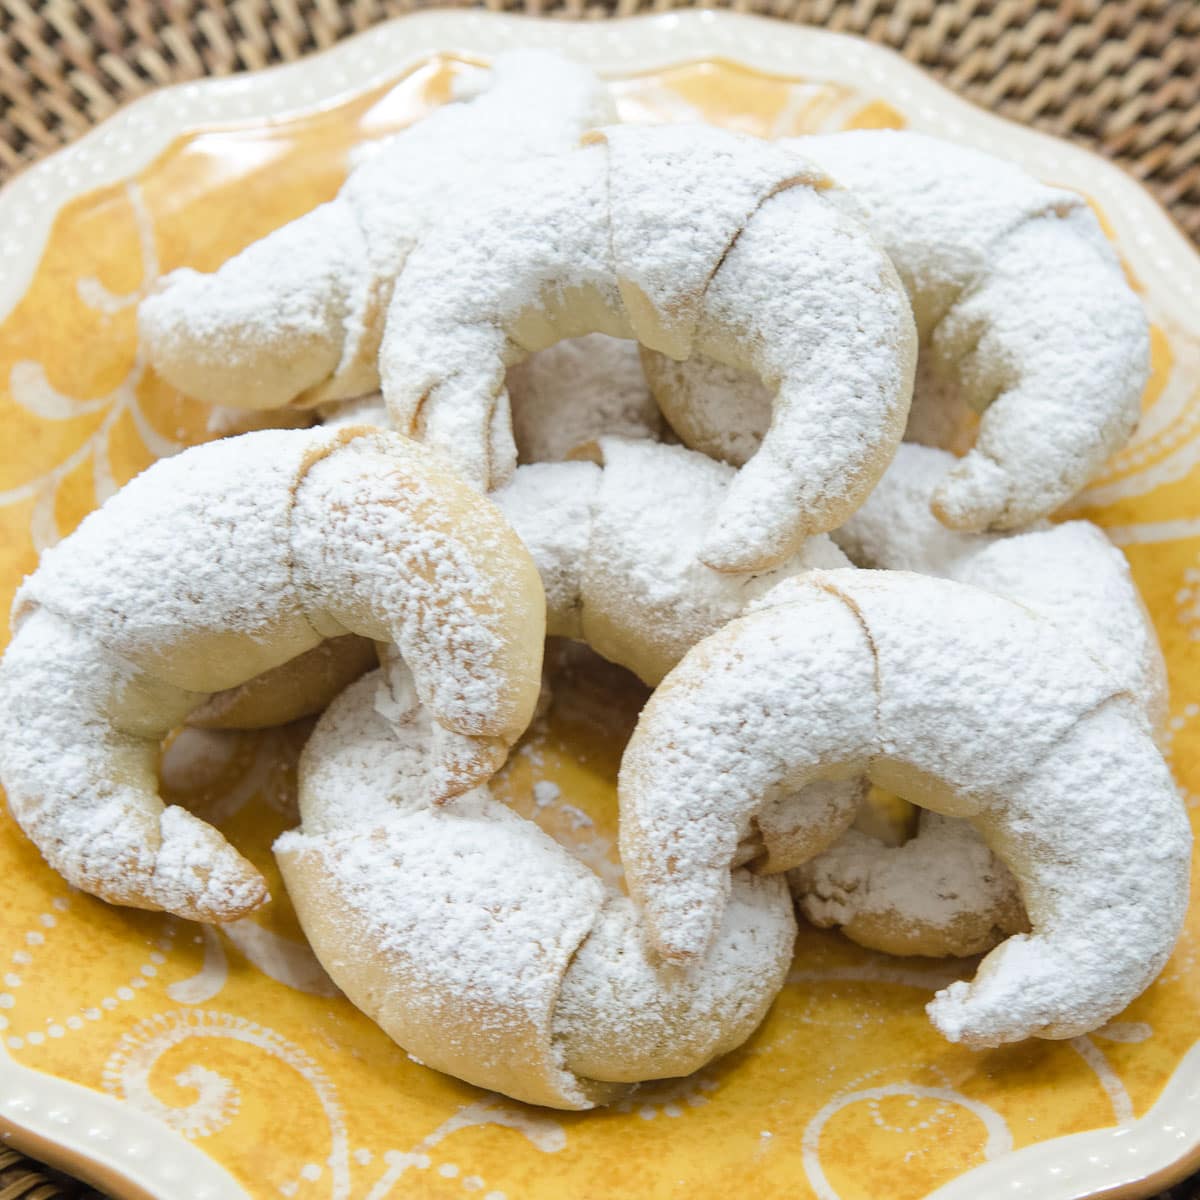 Crescent shaped sweetrolls filled with walnuts, cinnamon and sugar on a yellow plate.